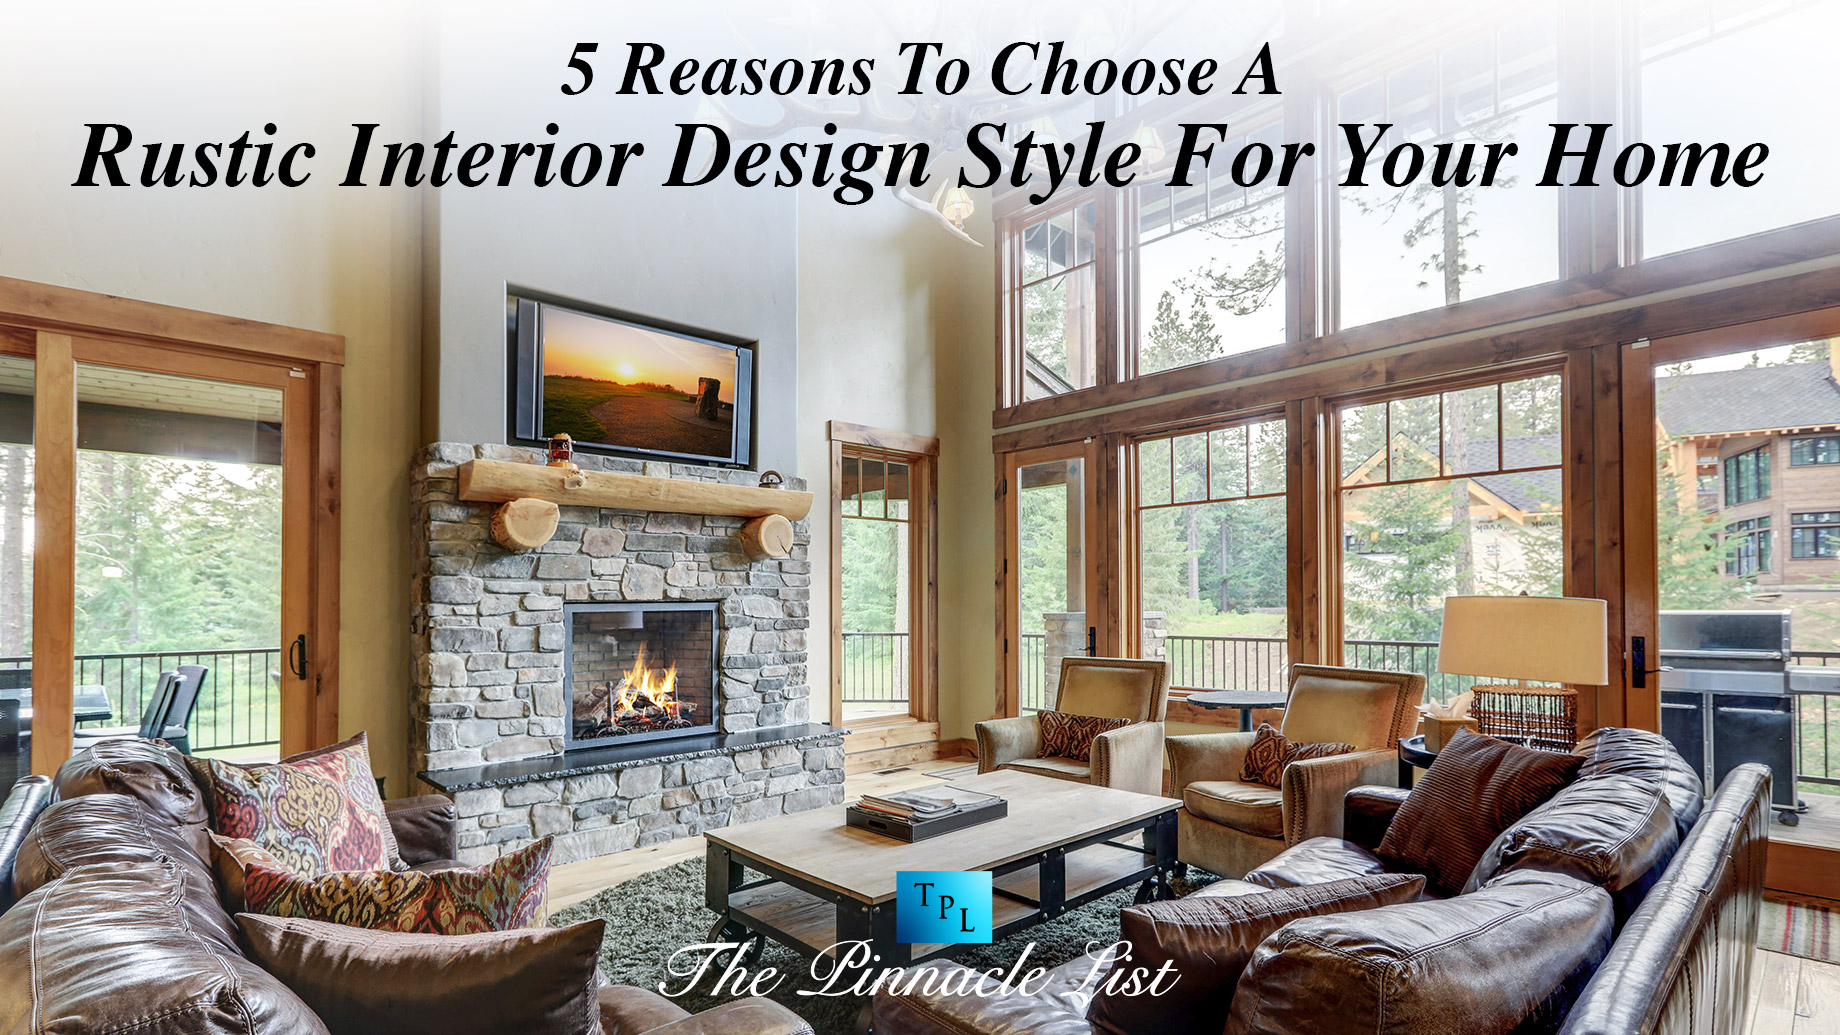 5 Reasons To Choose A Rustic Interior Design Style For Your Home